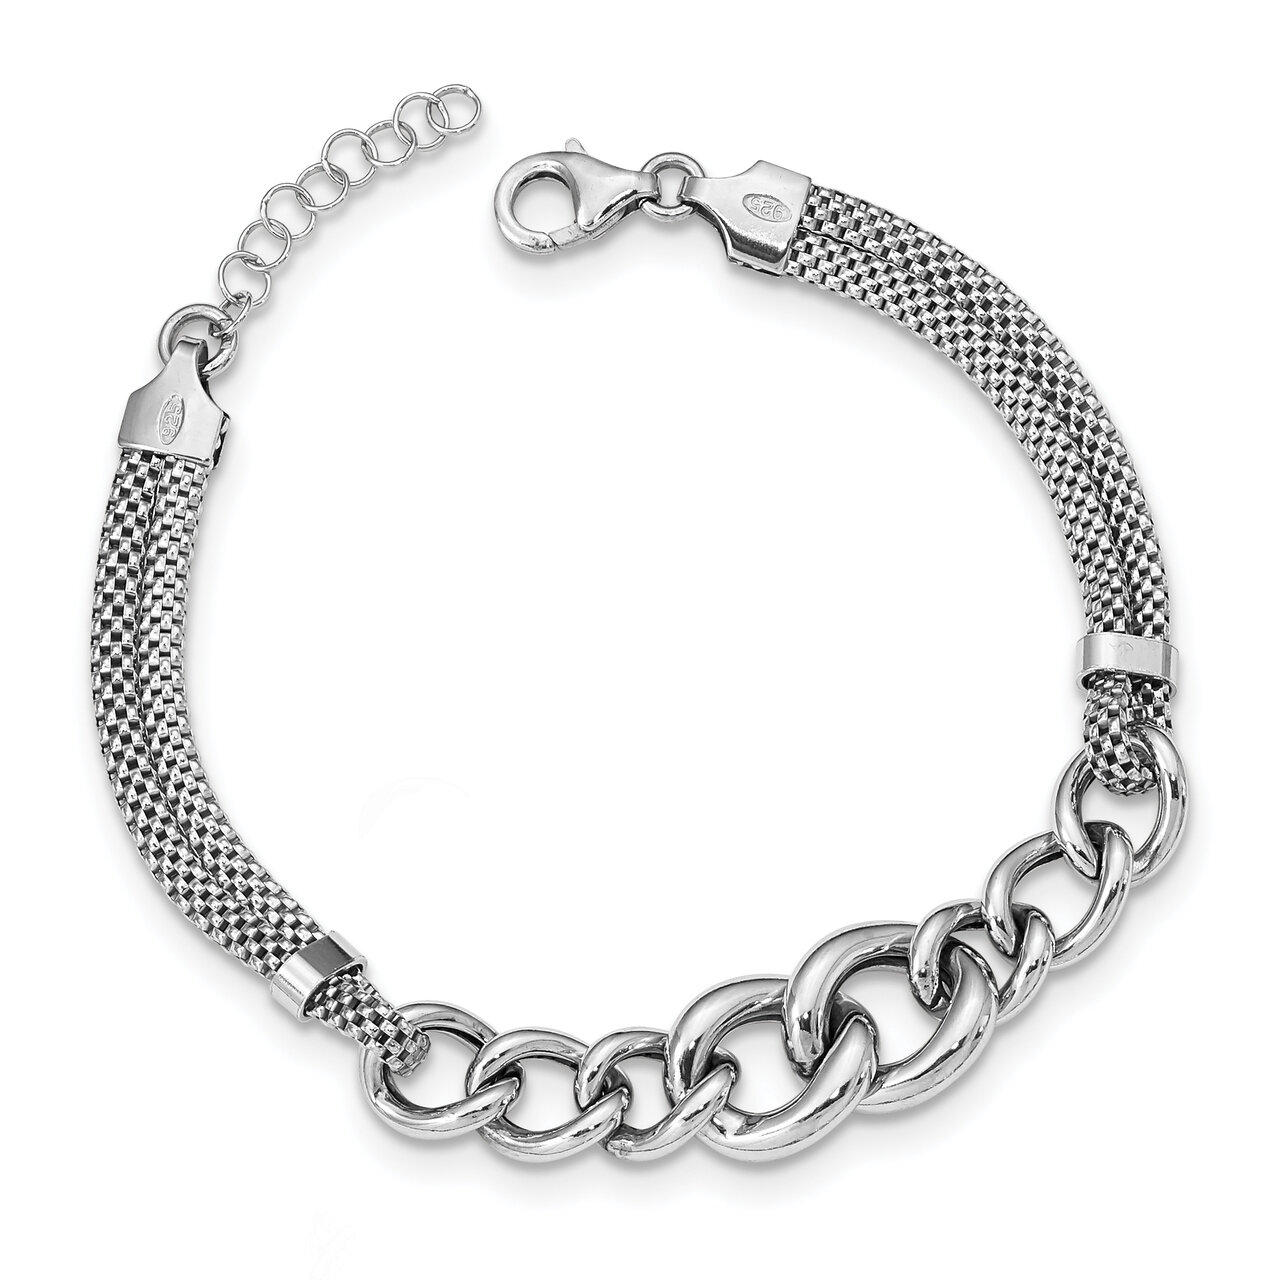 7 Inch Rhodium-plated Fancy Chain w/1in Ext. 2-strand Bracelet Sterling Silver QG5115-7